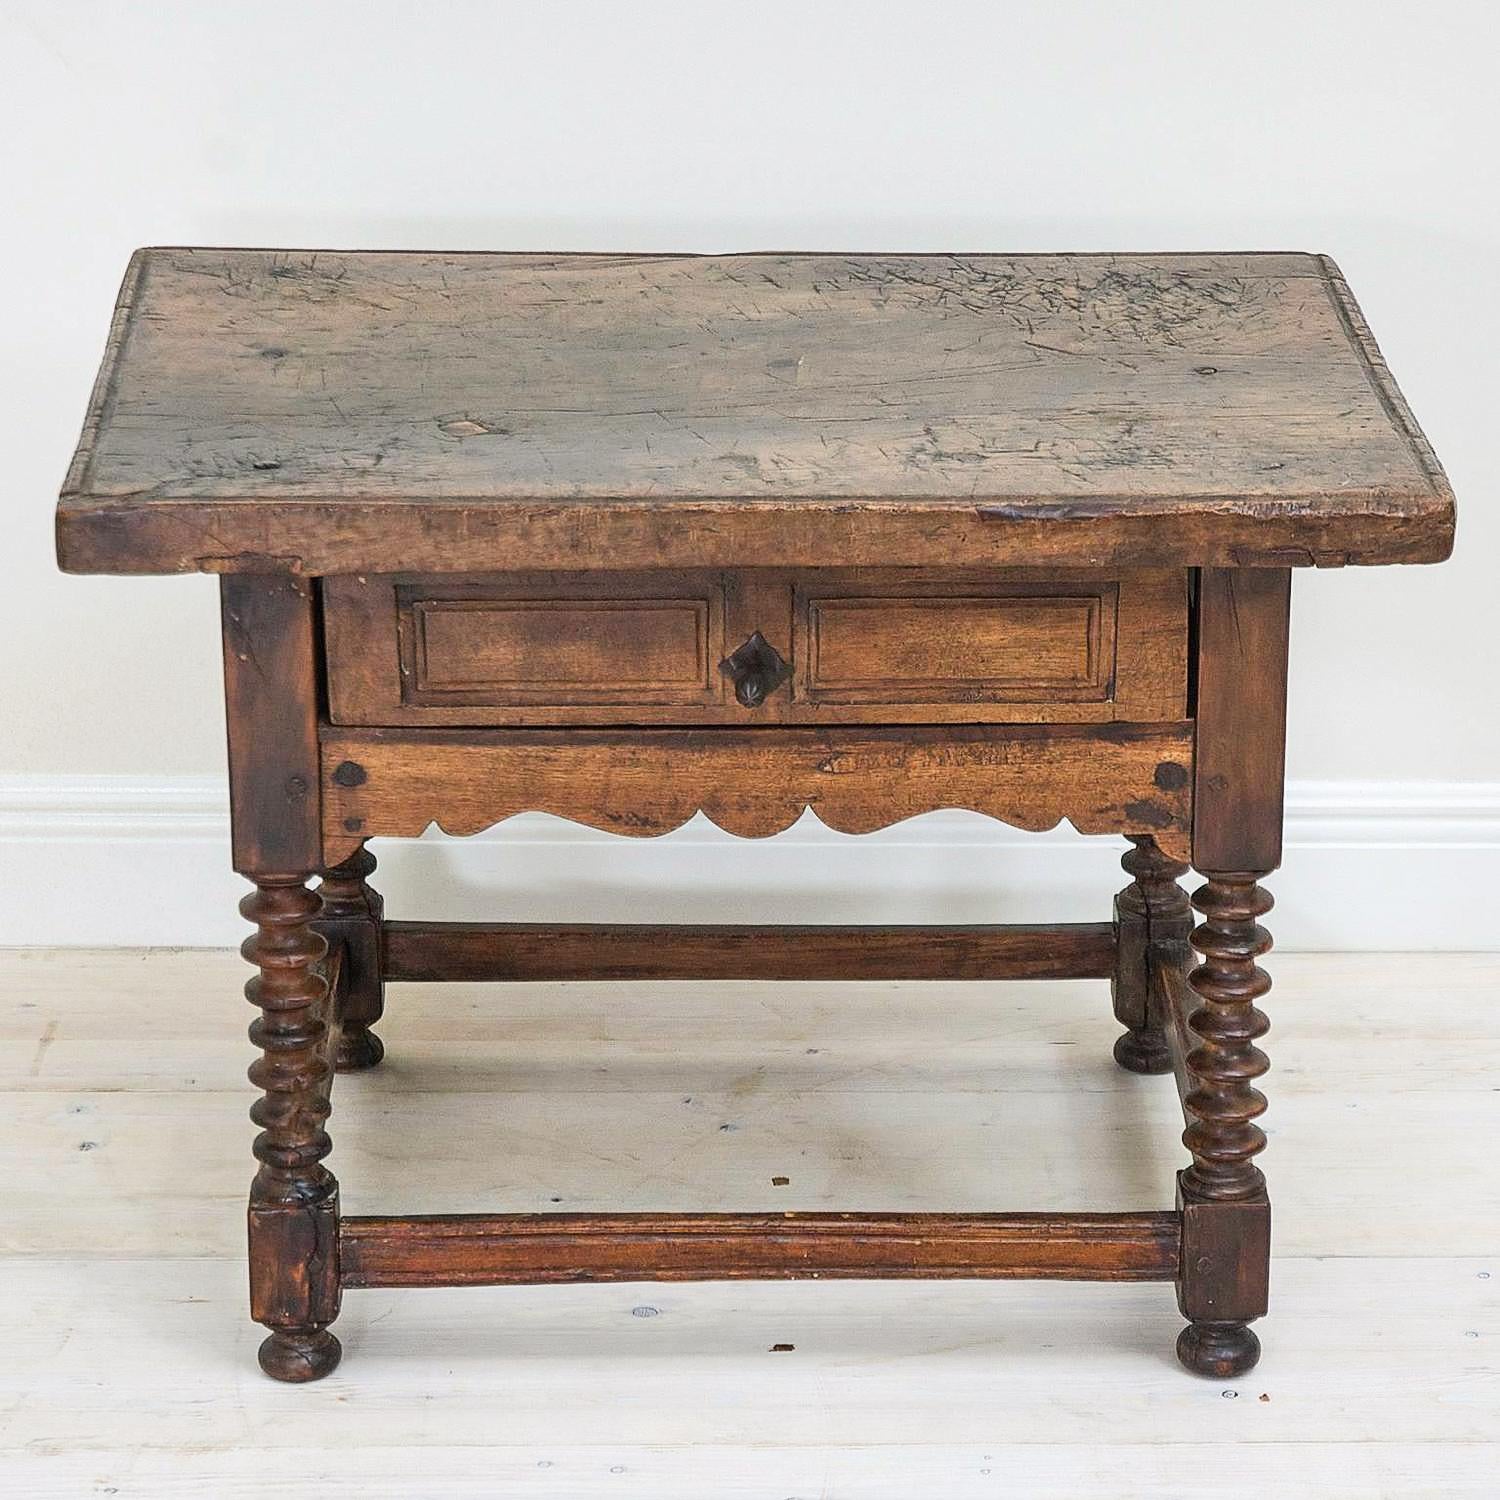 This small-sized 18th century rustic Spanish shoemaker's work table (mesa de zapatero) was hand crafted, as much of this type of traditional furniture was, from solid walnut. The tabletop is a single plank, and shows wear and cut marks attesting to